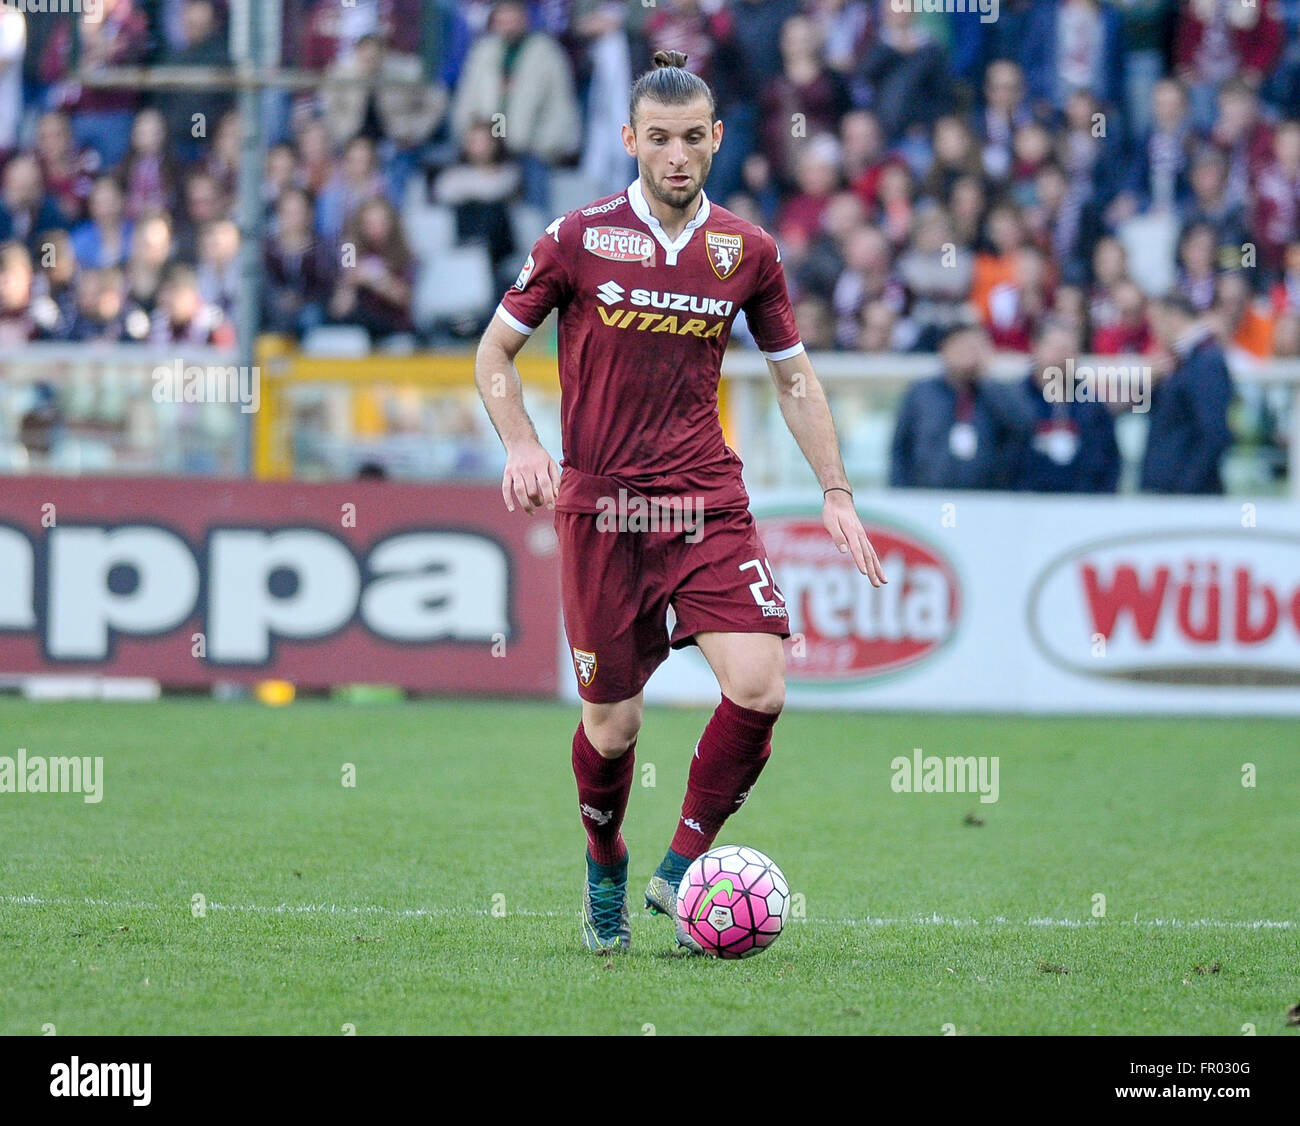 Turin, Italy. 20 March, 2016. Gaston Silva in action during the Serie A football match between Torino FC and Juventus FC at Olympic stadium in Turin, Italy. Credit:  Nicolò Campo/Alamy Live News Stock Photo